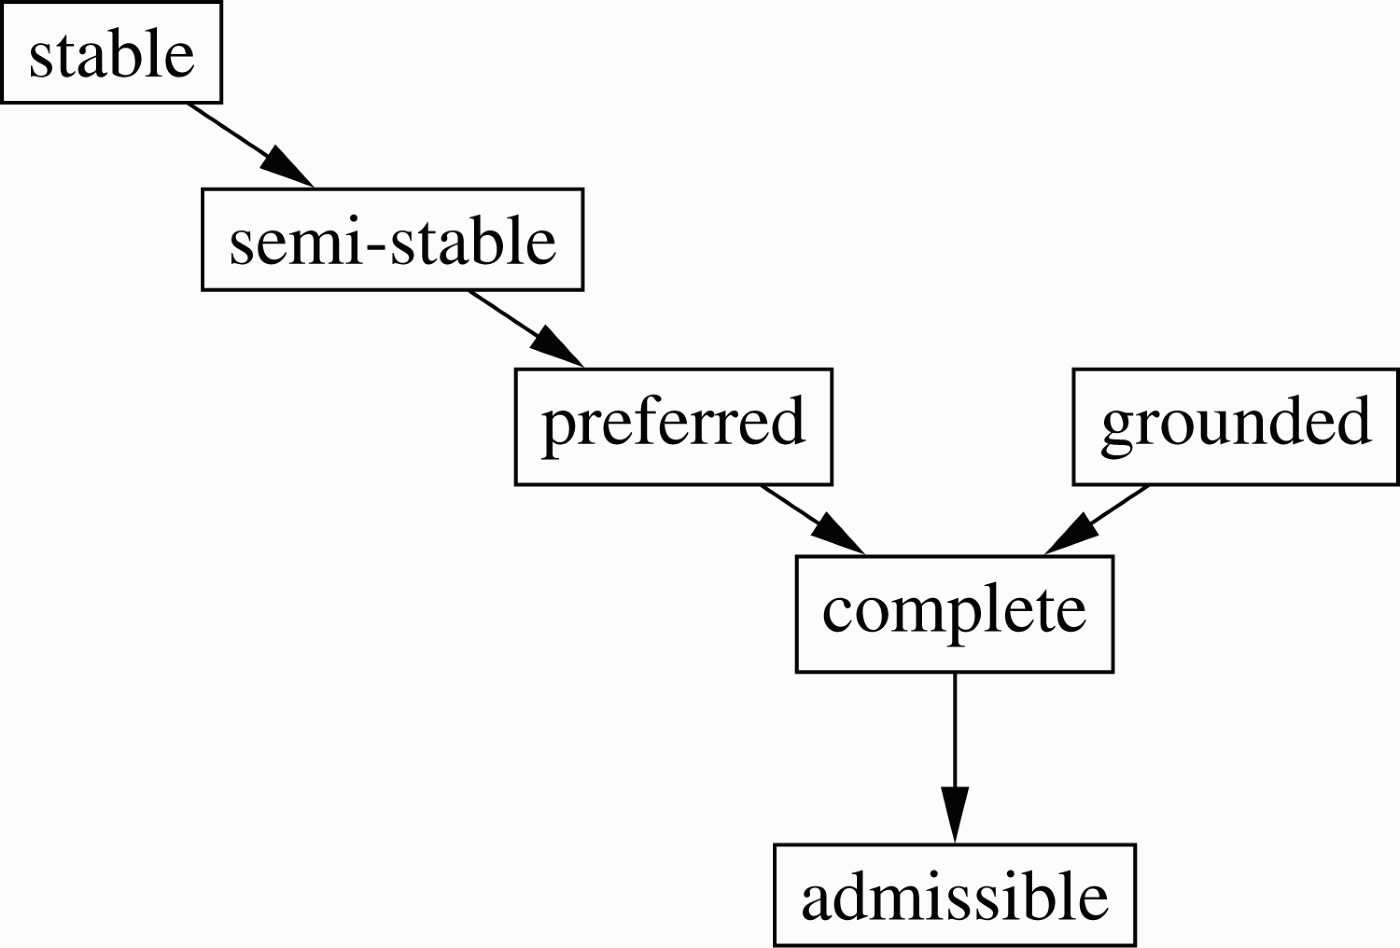 Overview of argumentation semantics and their relations.